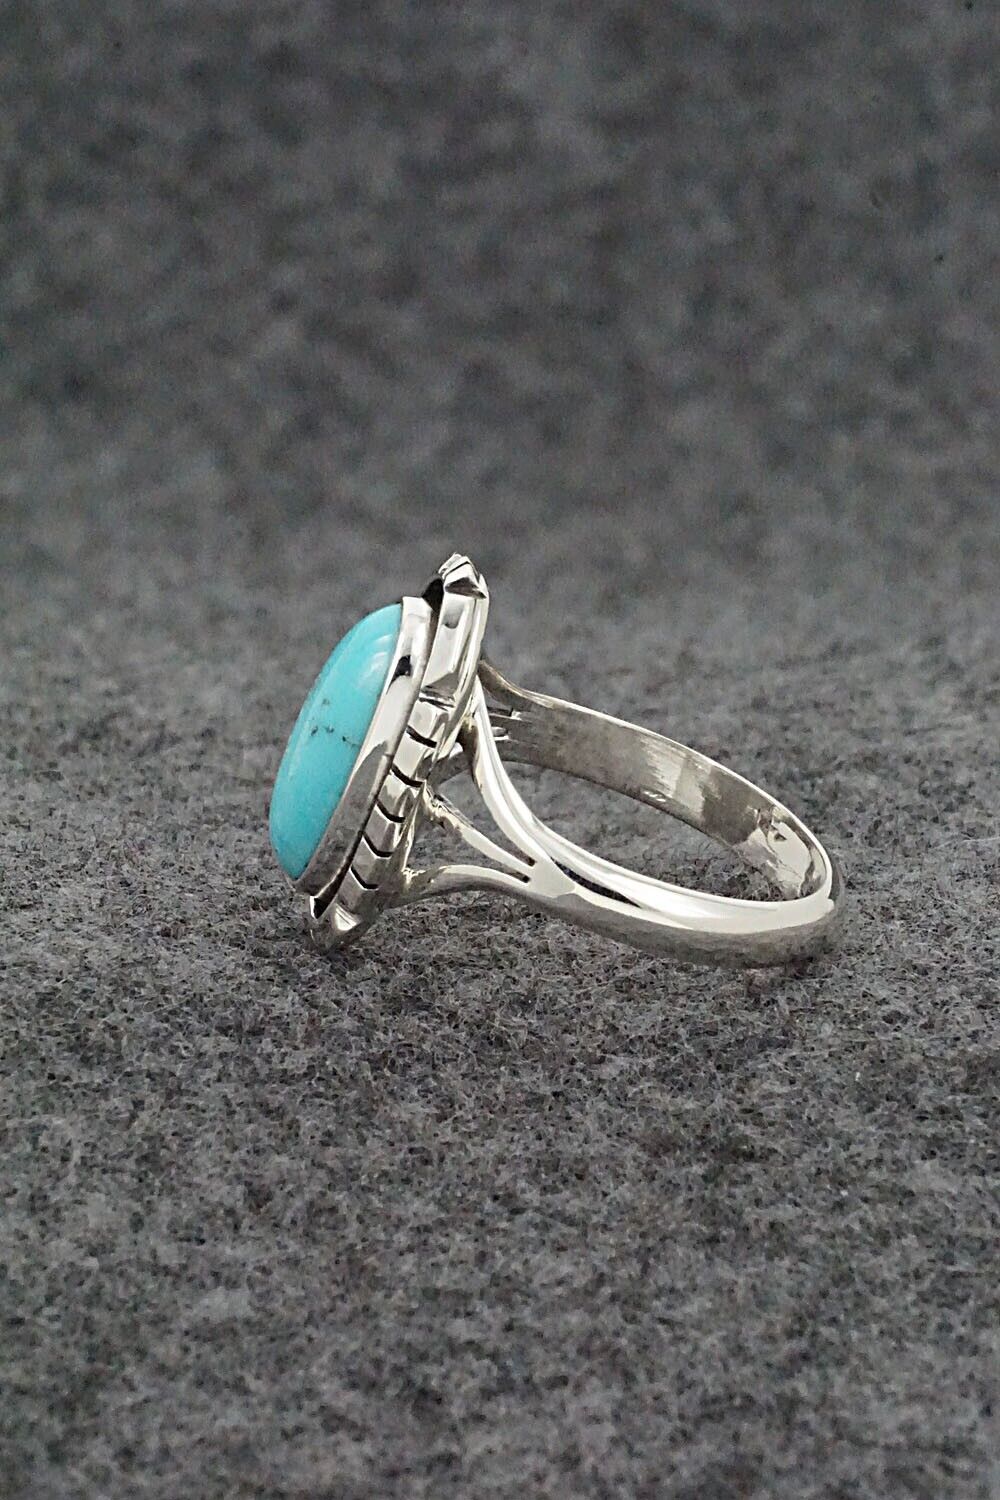 Turquoise & Sterling Silver Ring - Amos Begay - Size 8.5